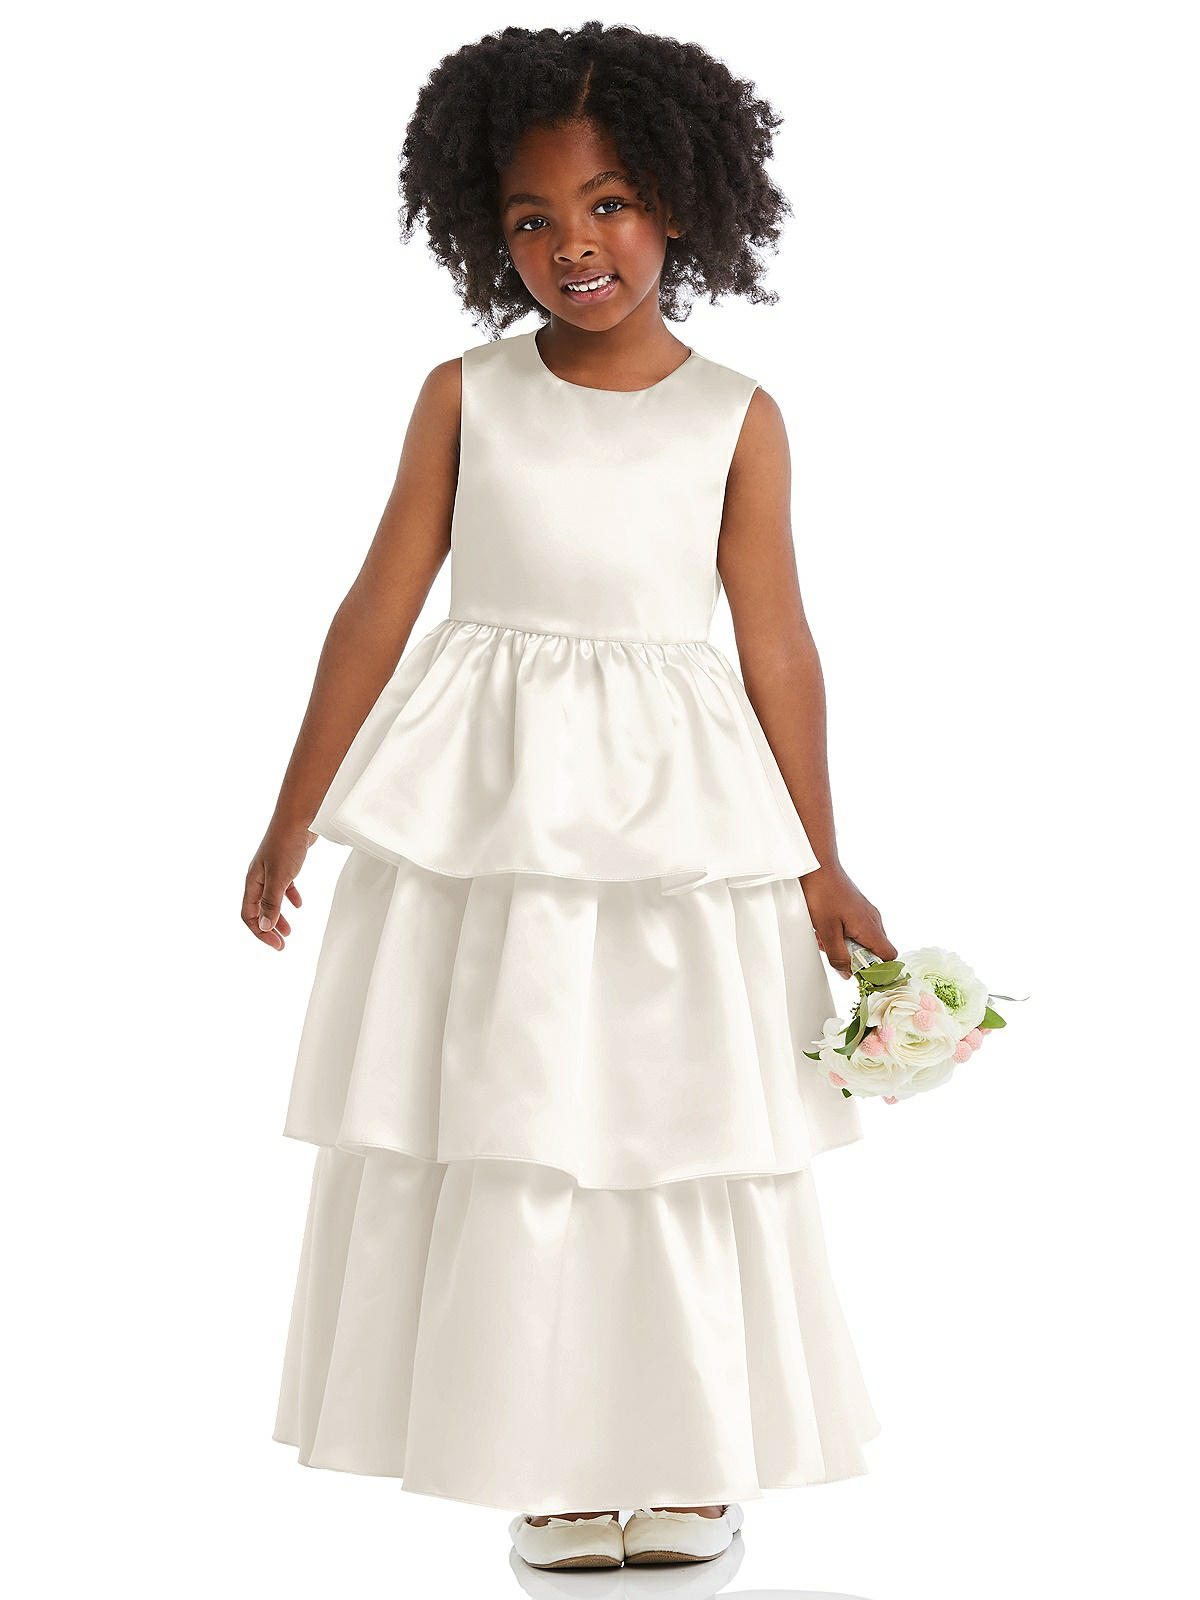 The Skirt Dessy Neck Satin Jewel | In Tiered Ivory Flower Dress Girl Group